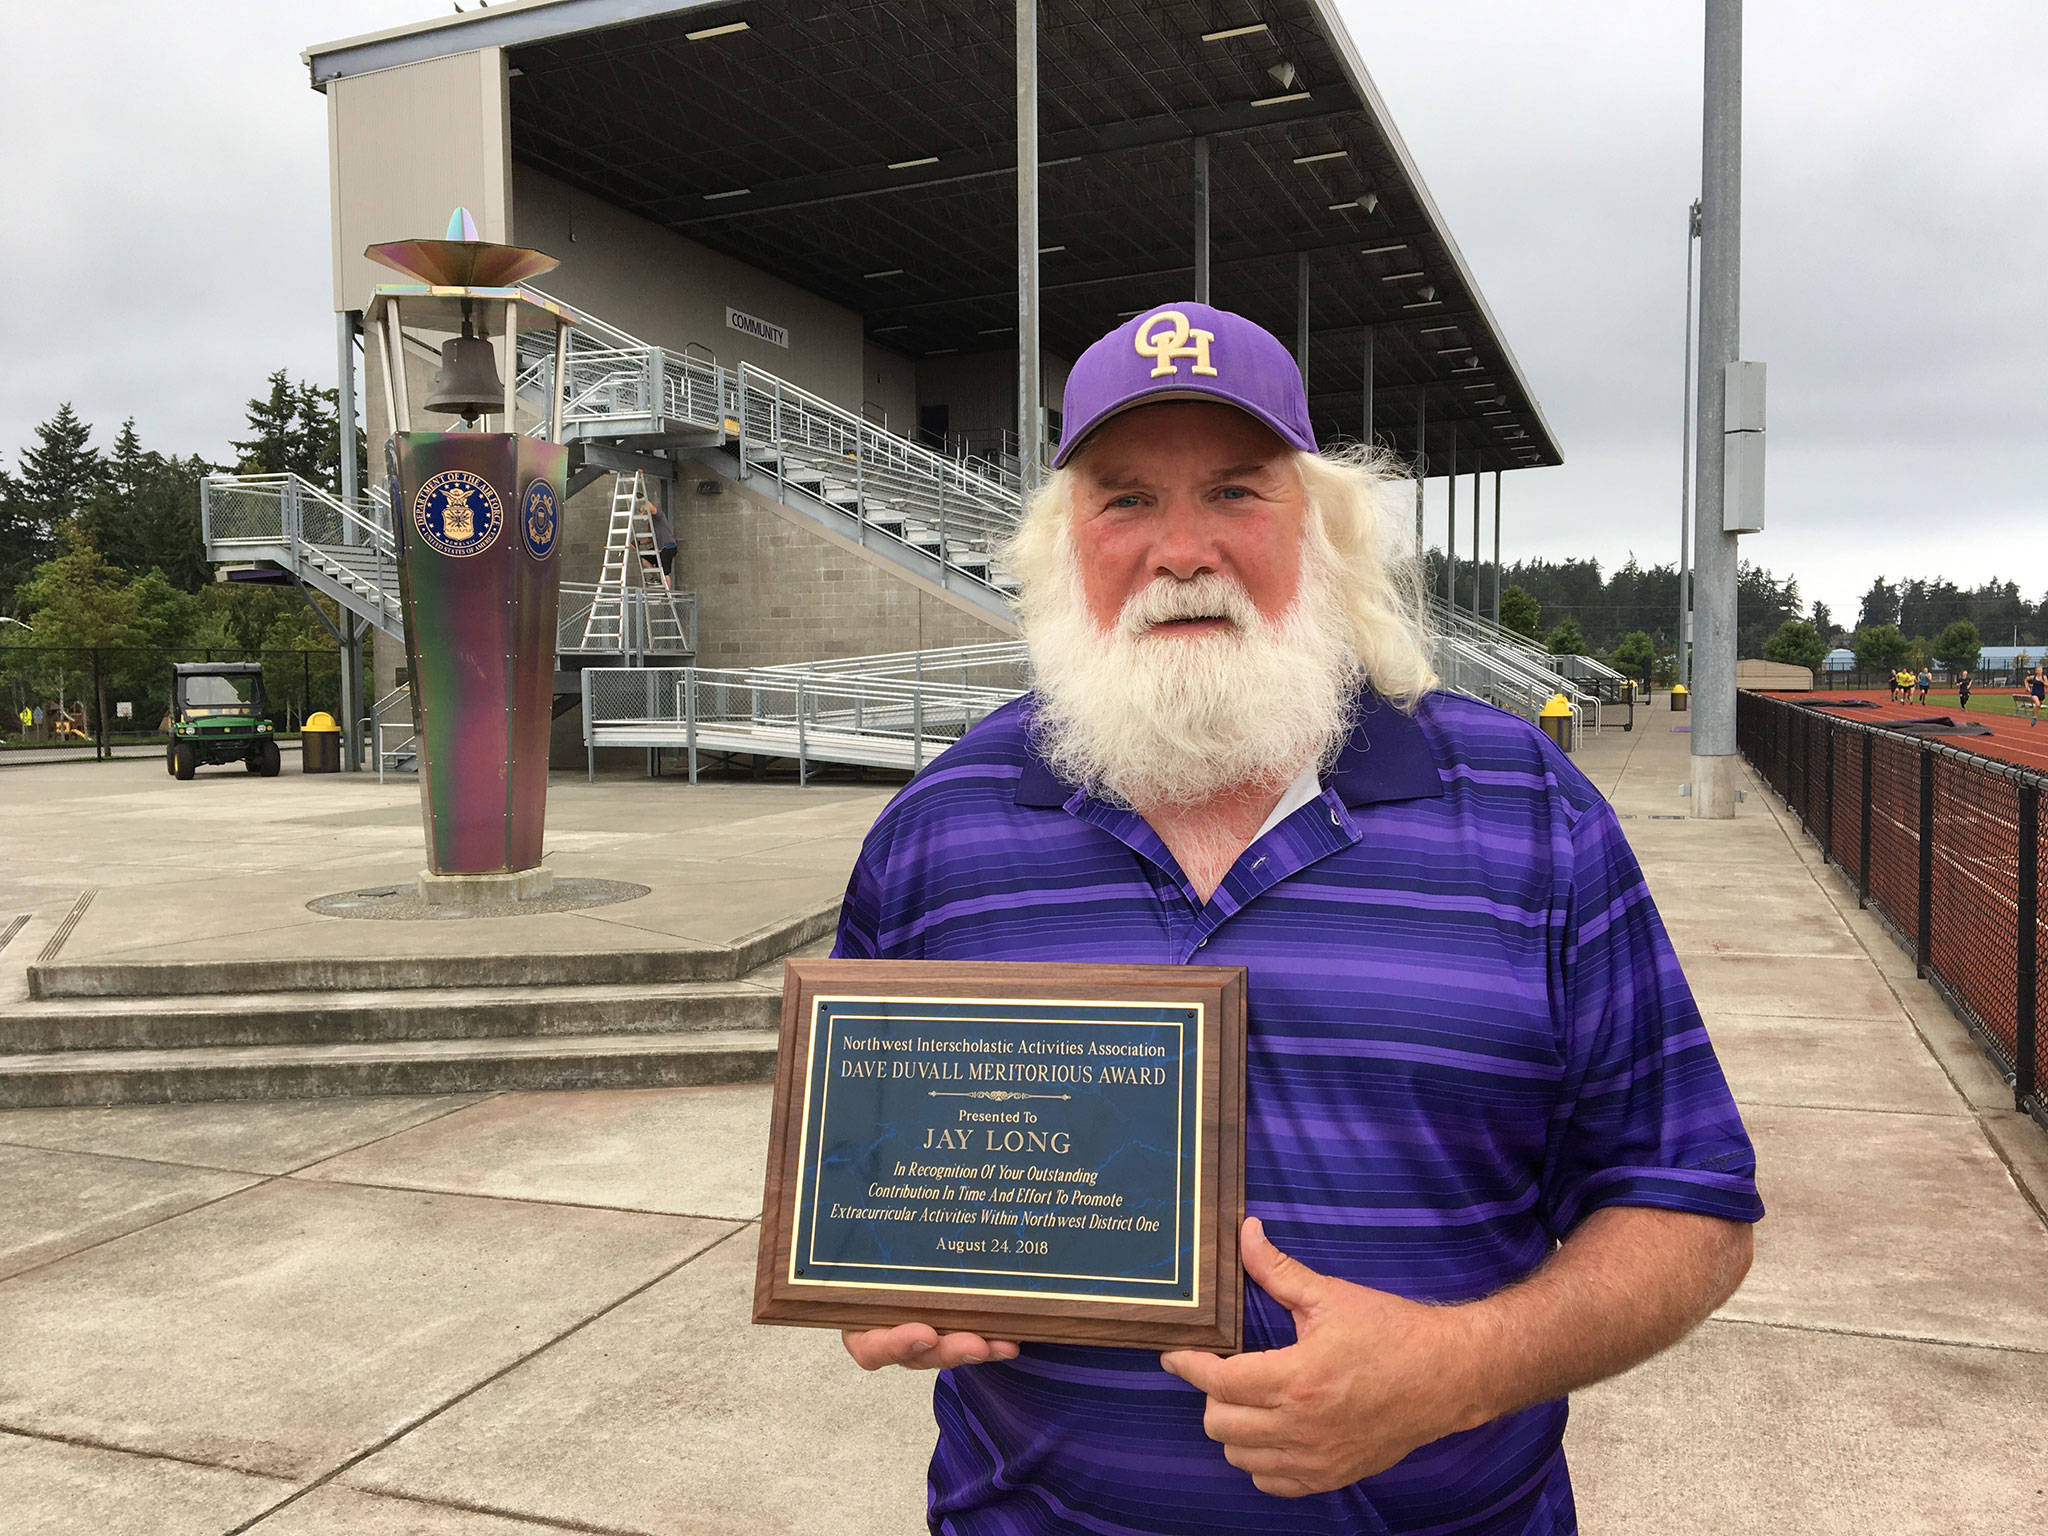 Jay Long displays his Dave DuVall Award in front of Wildcat Memorial Stadium where he volunteers as the public address announcer. (Photo by Jim Waller/Whidbey News-Times)